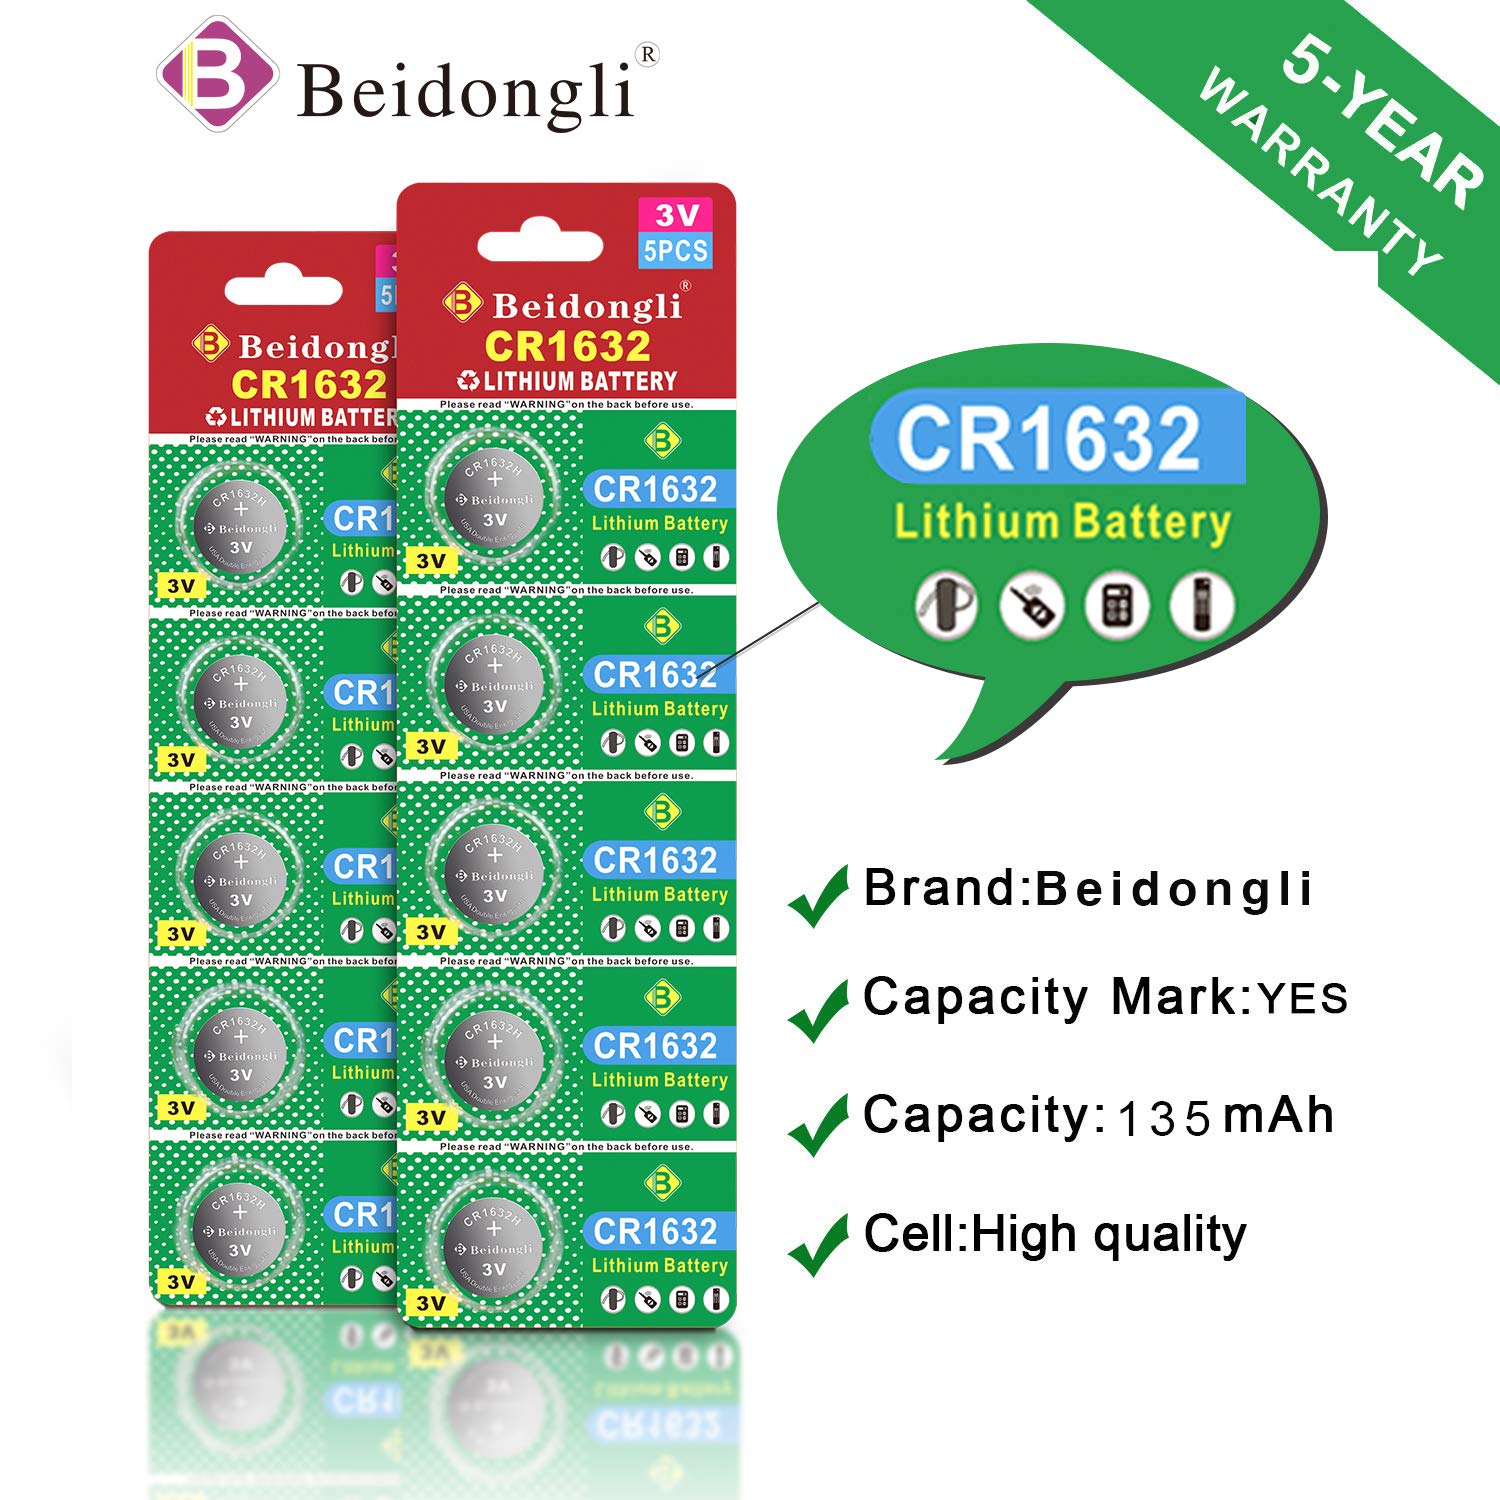 Beidongli CR1632 3 Volt Lithium Coin Cell Battery (10 Batteries)【5-Years Warranty】